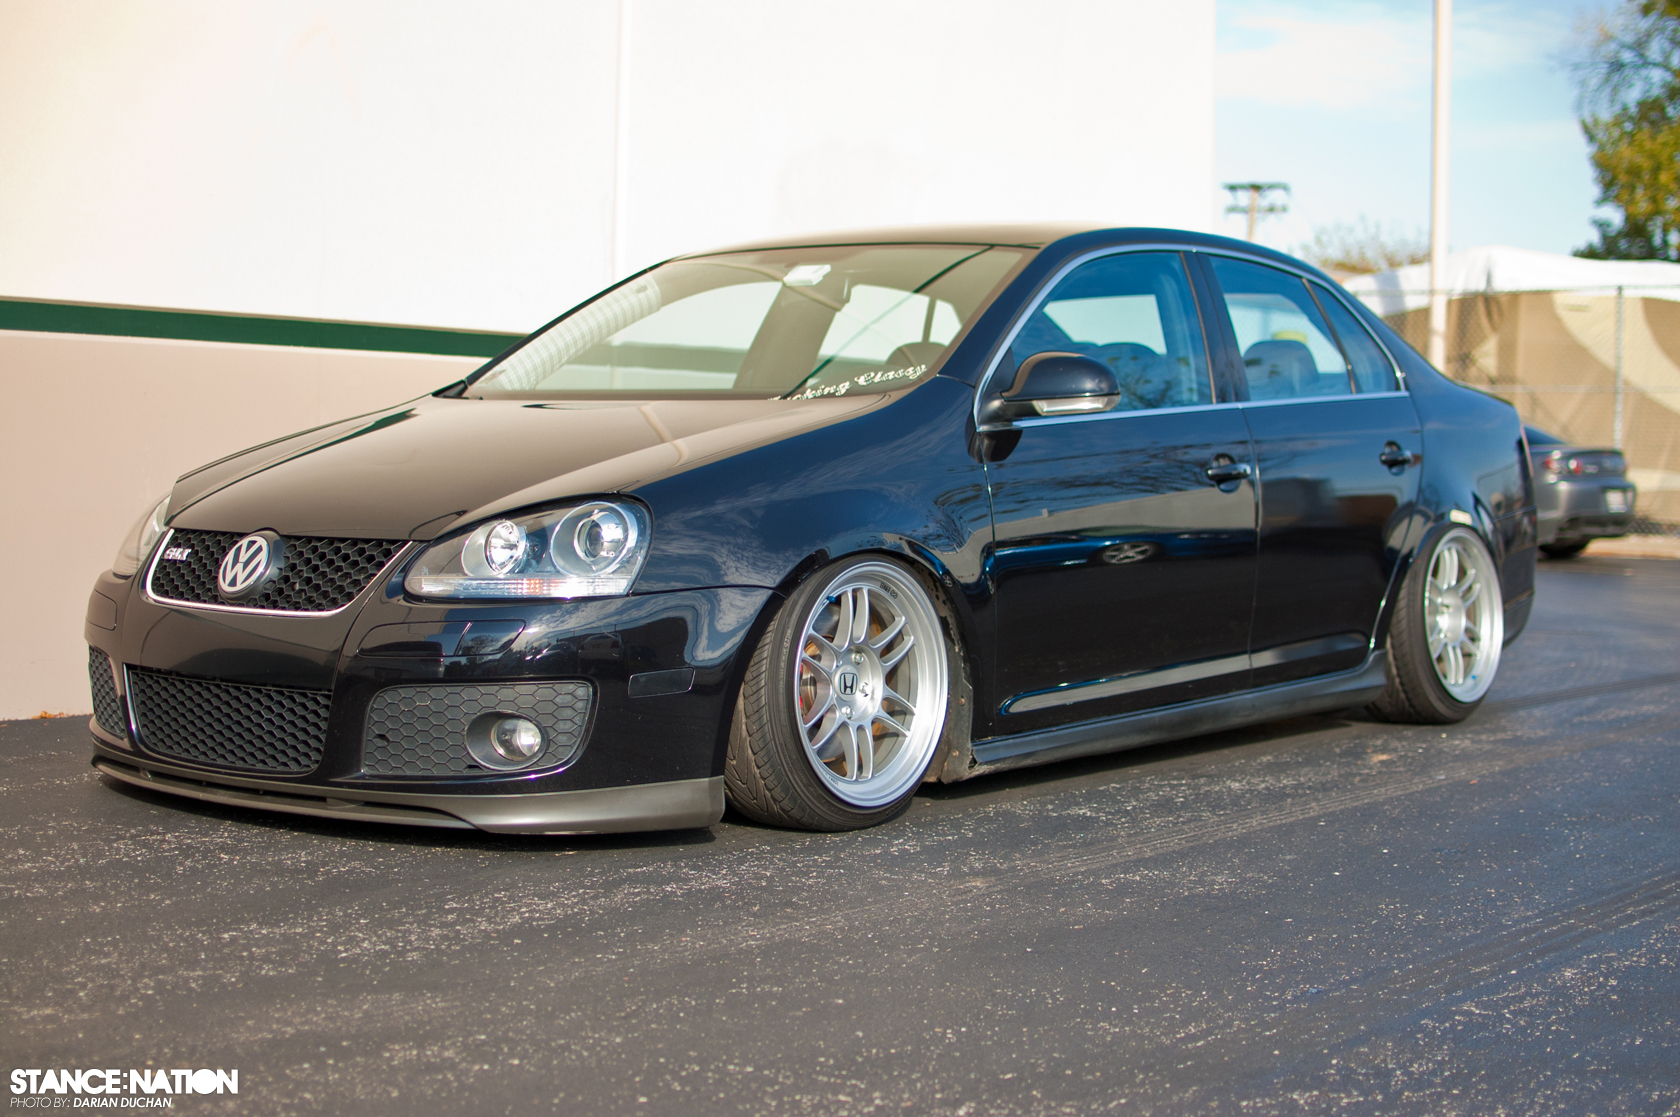 damn i forgot to mention Steeze_Its rocking a retarded static stance 17x9.5...